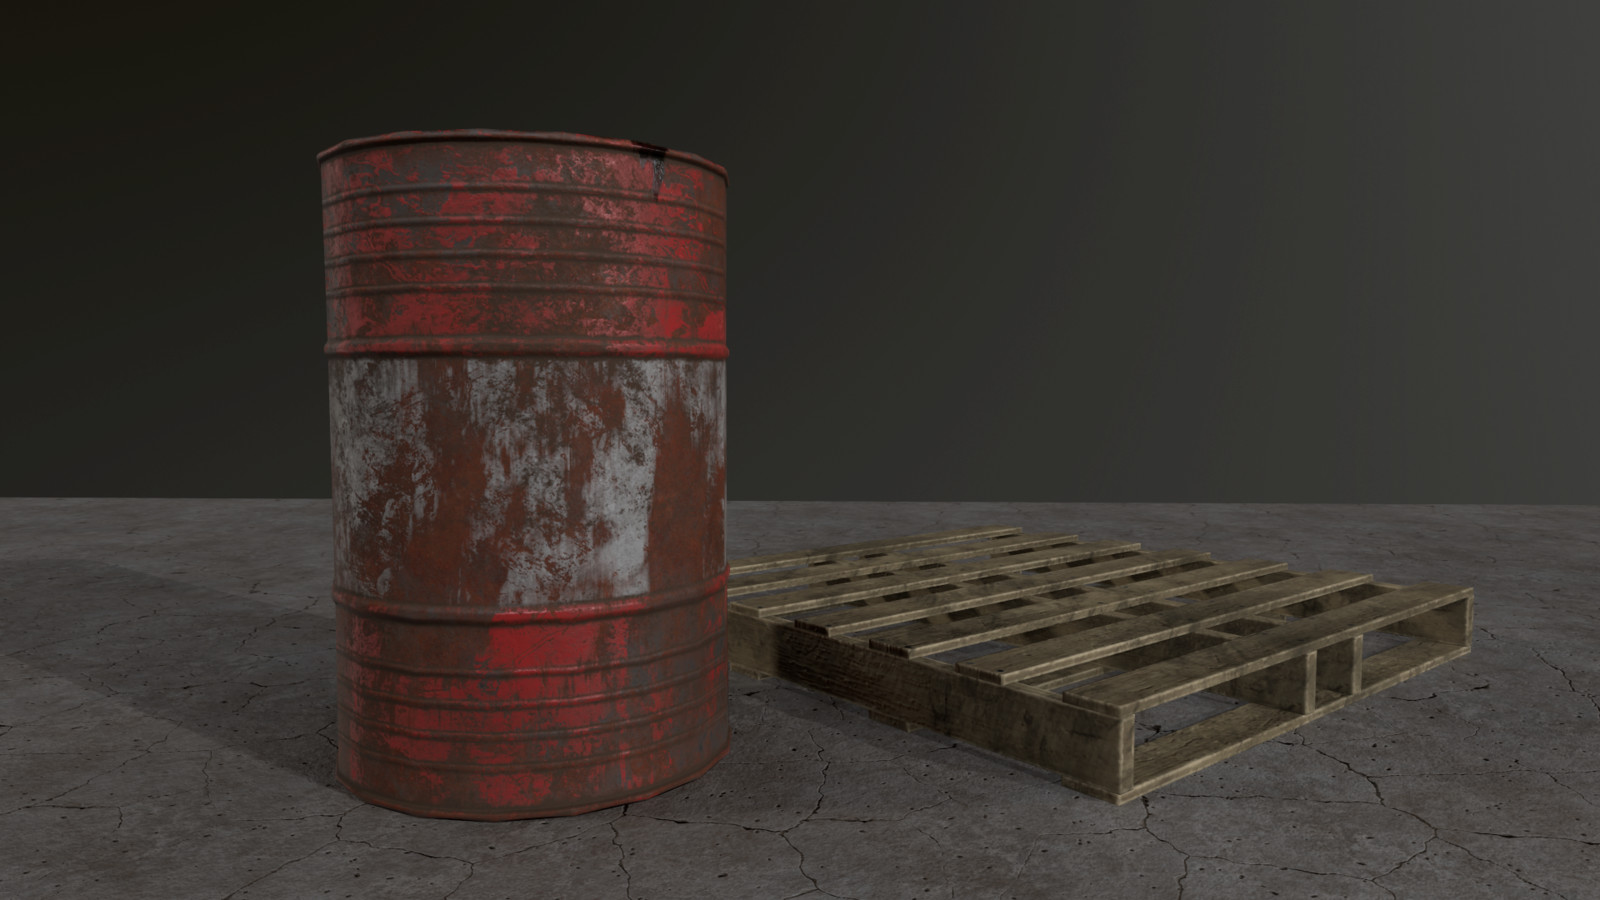 Oil drum and wood pallet in Marmoset